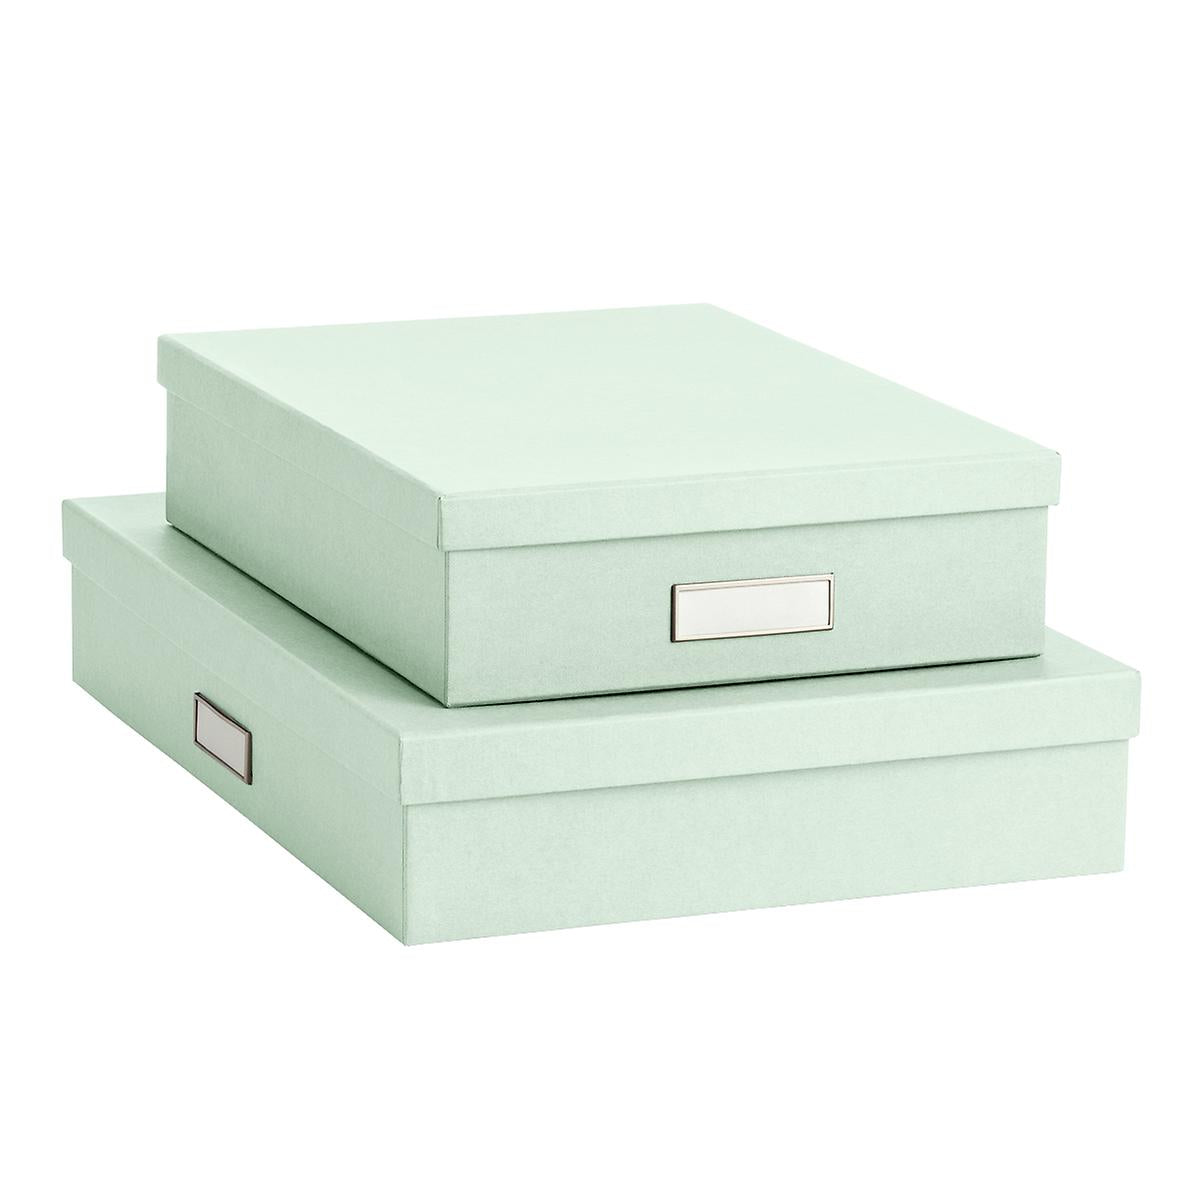 Bigso Mint Stockholm Office Storage Boxes